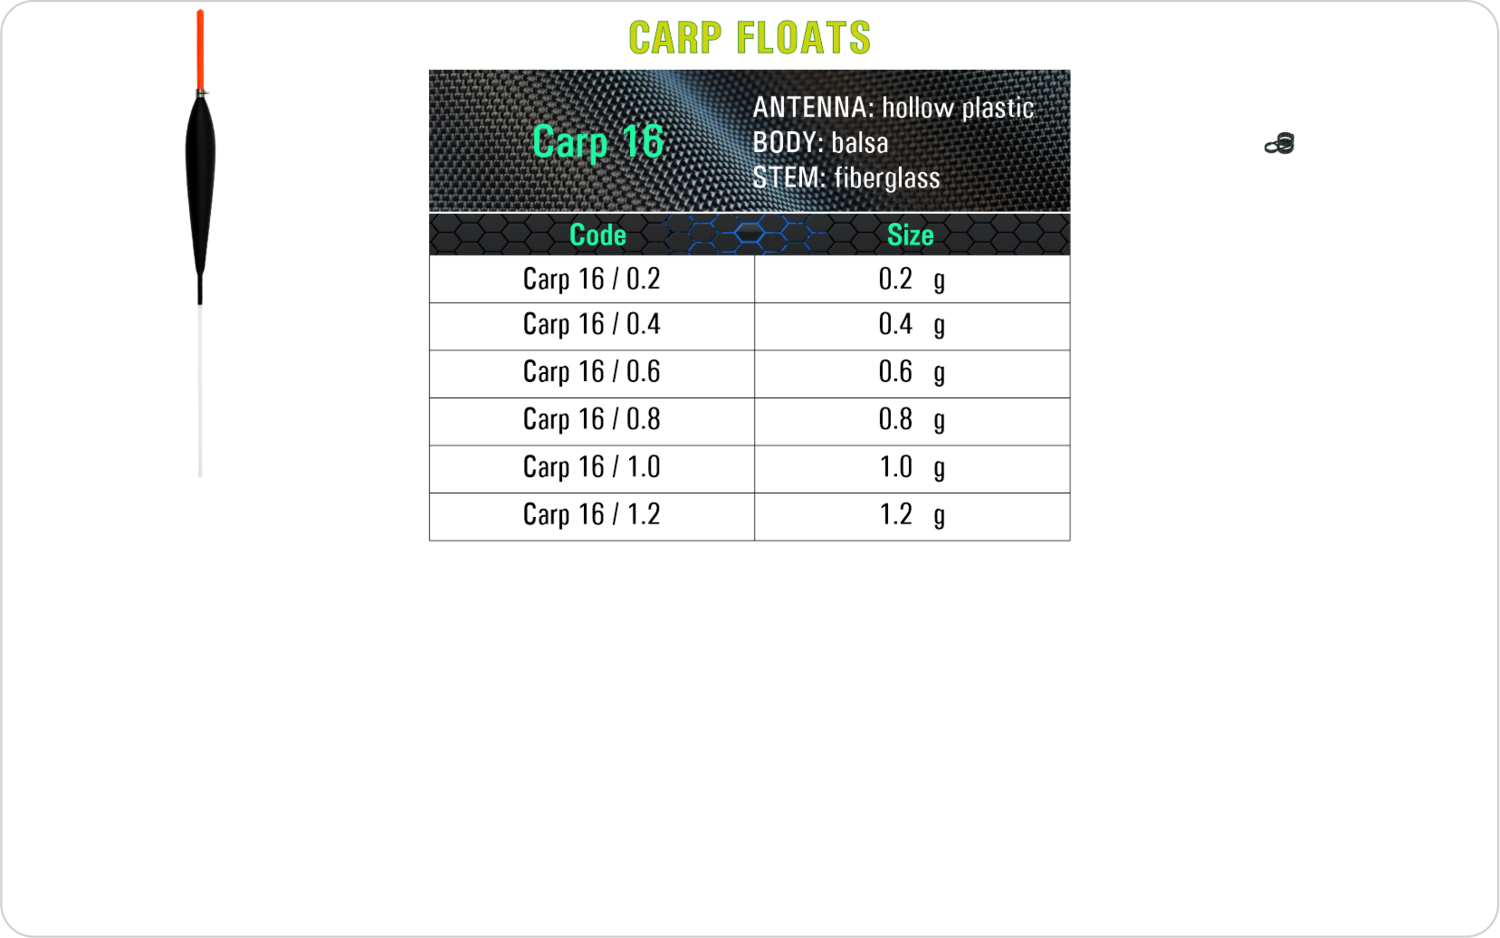 SF Carp 16 Carp float model and table containing an additional information about this float with different codes, sizes, types of the body, the stem and the antenna of the float.